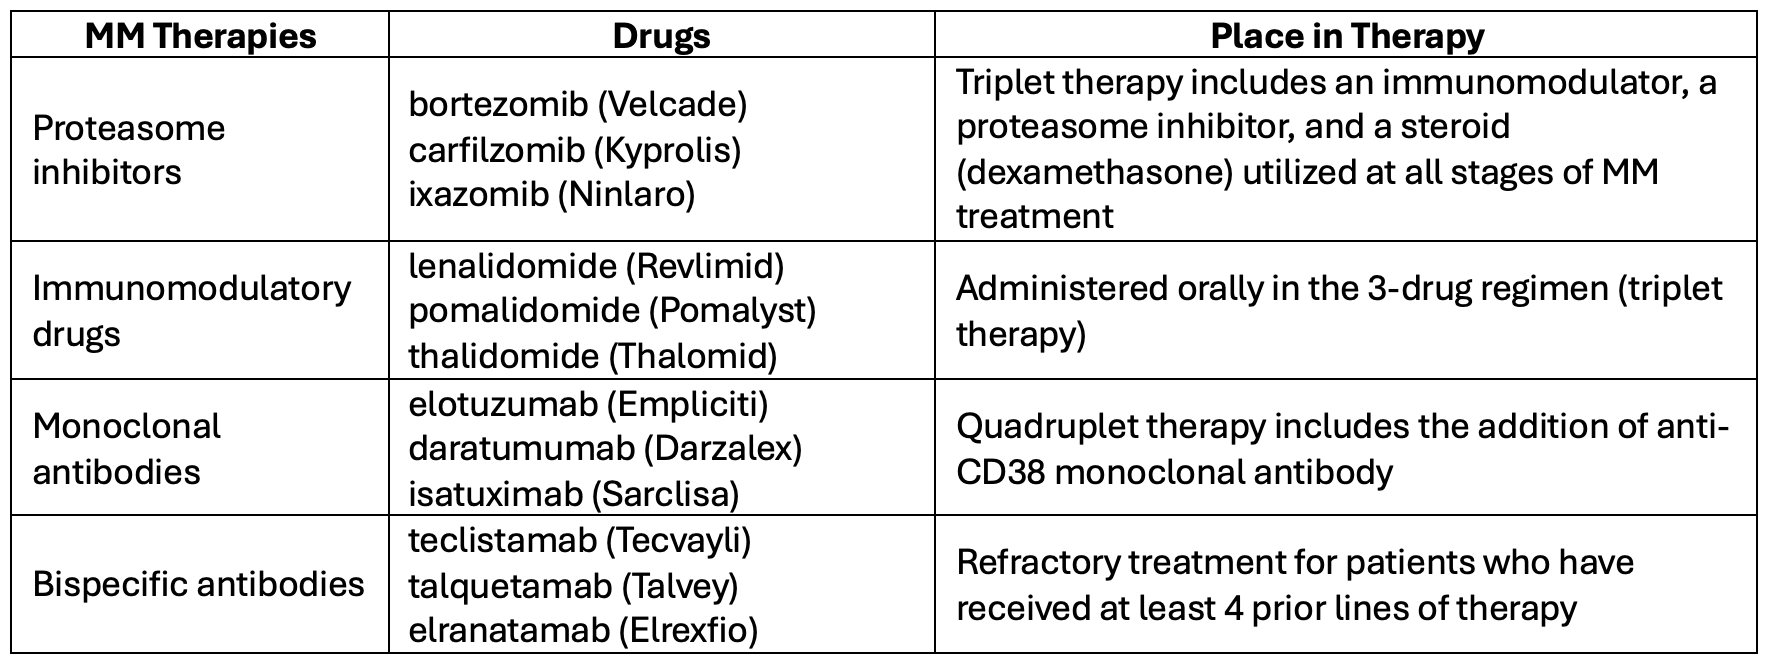 Table 1.2 Multiple Myeloma Therapies